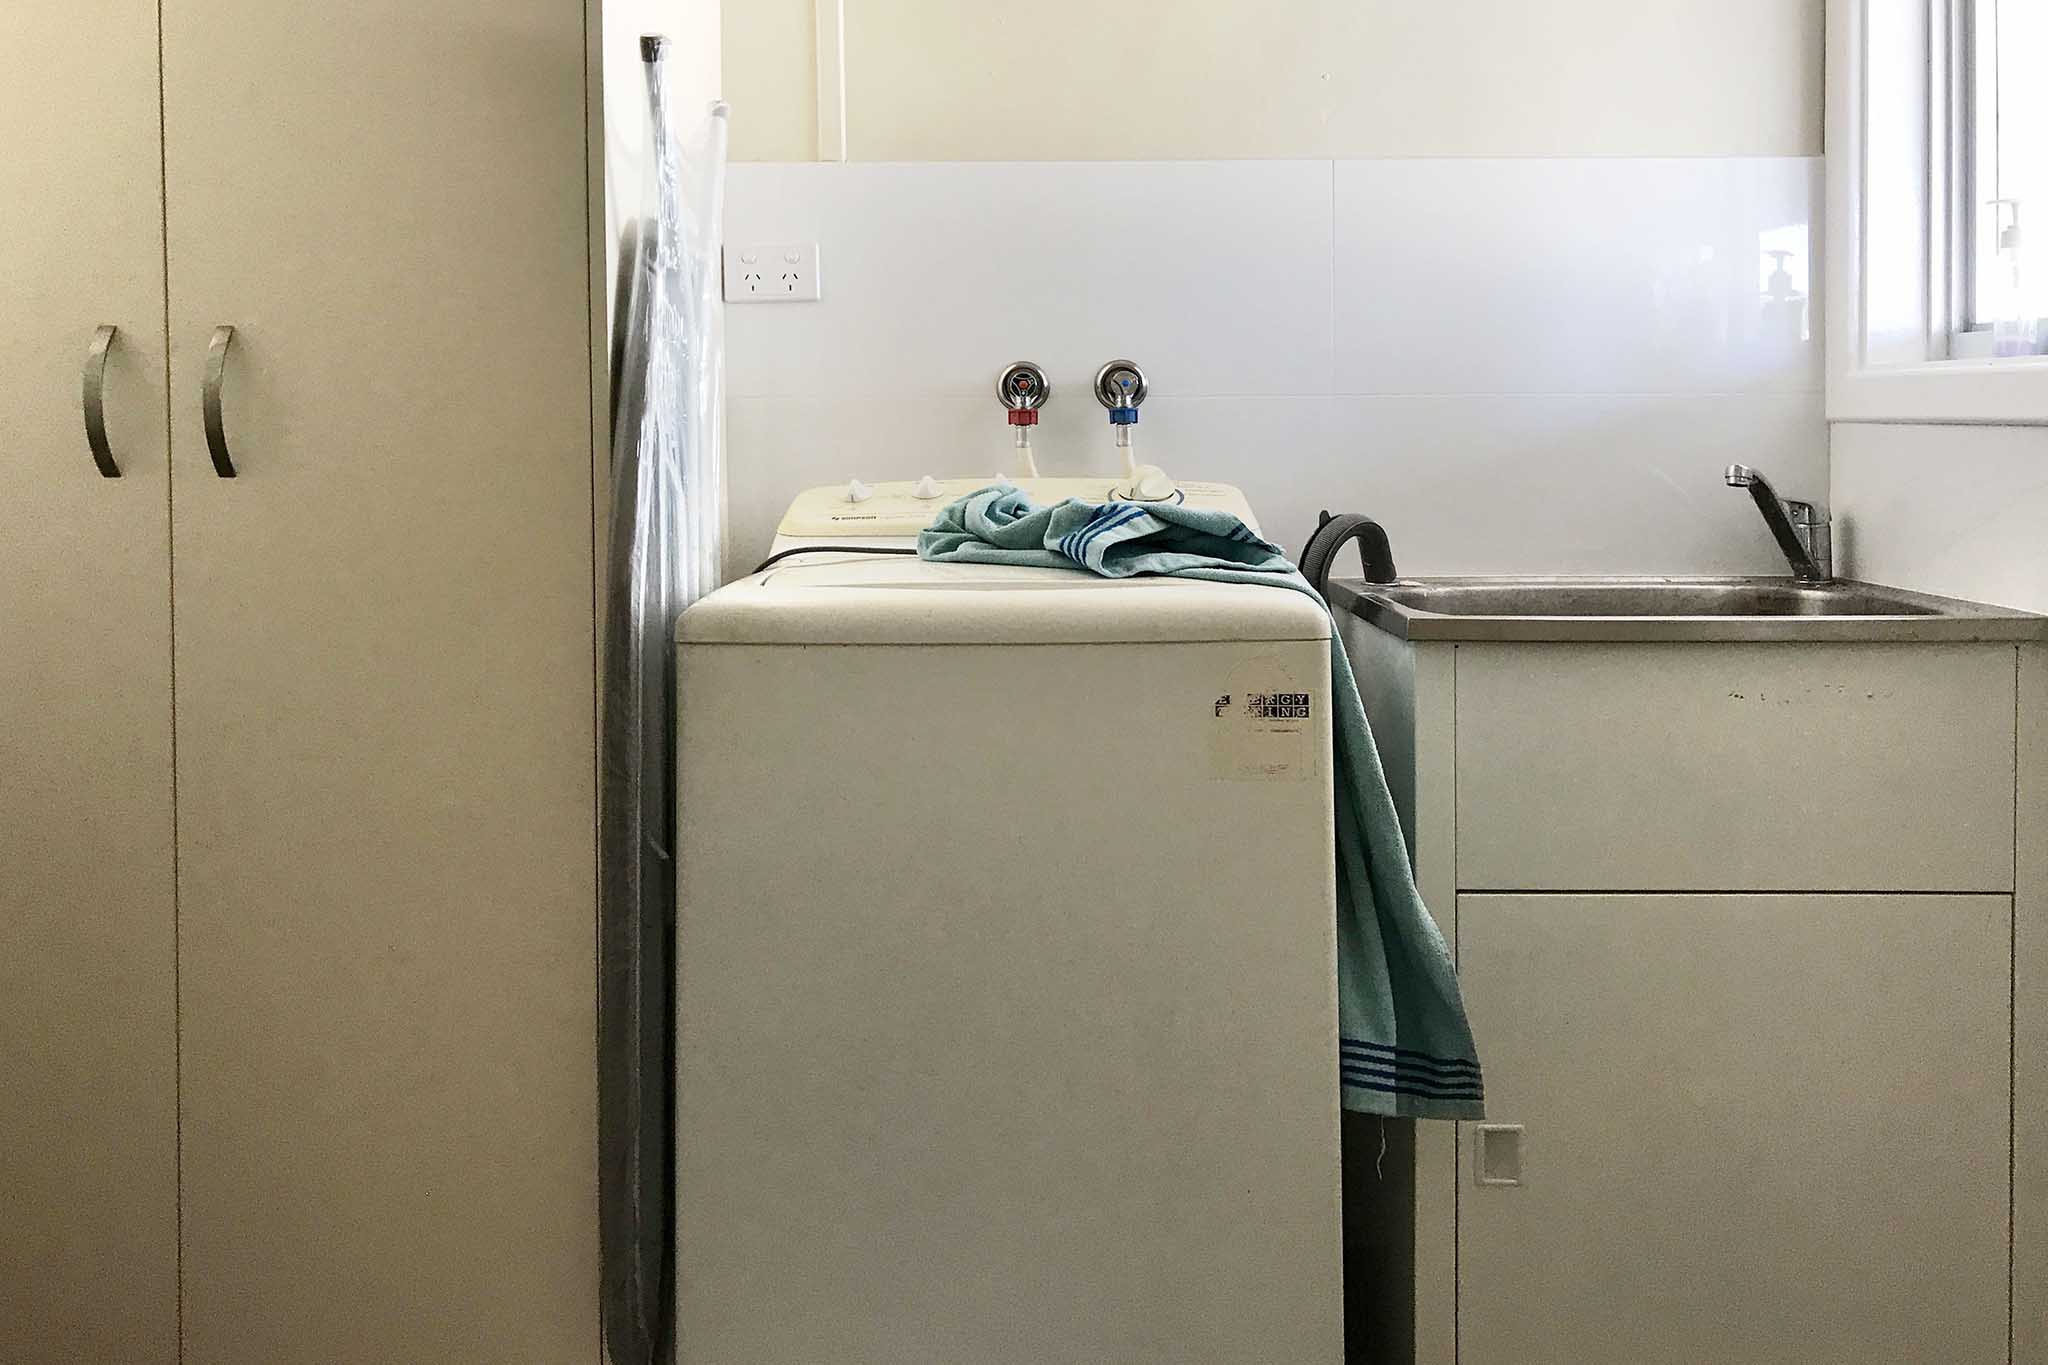 The laundry is equipped with a top-loading washing machine and a full-sized laundry trough. Cleaning materials are supplied. The toilet is situated off the laundry.